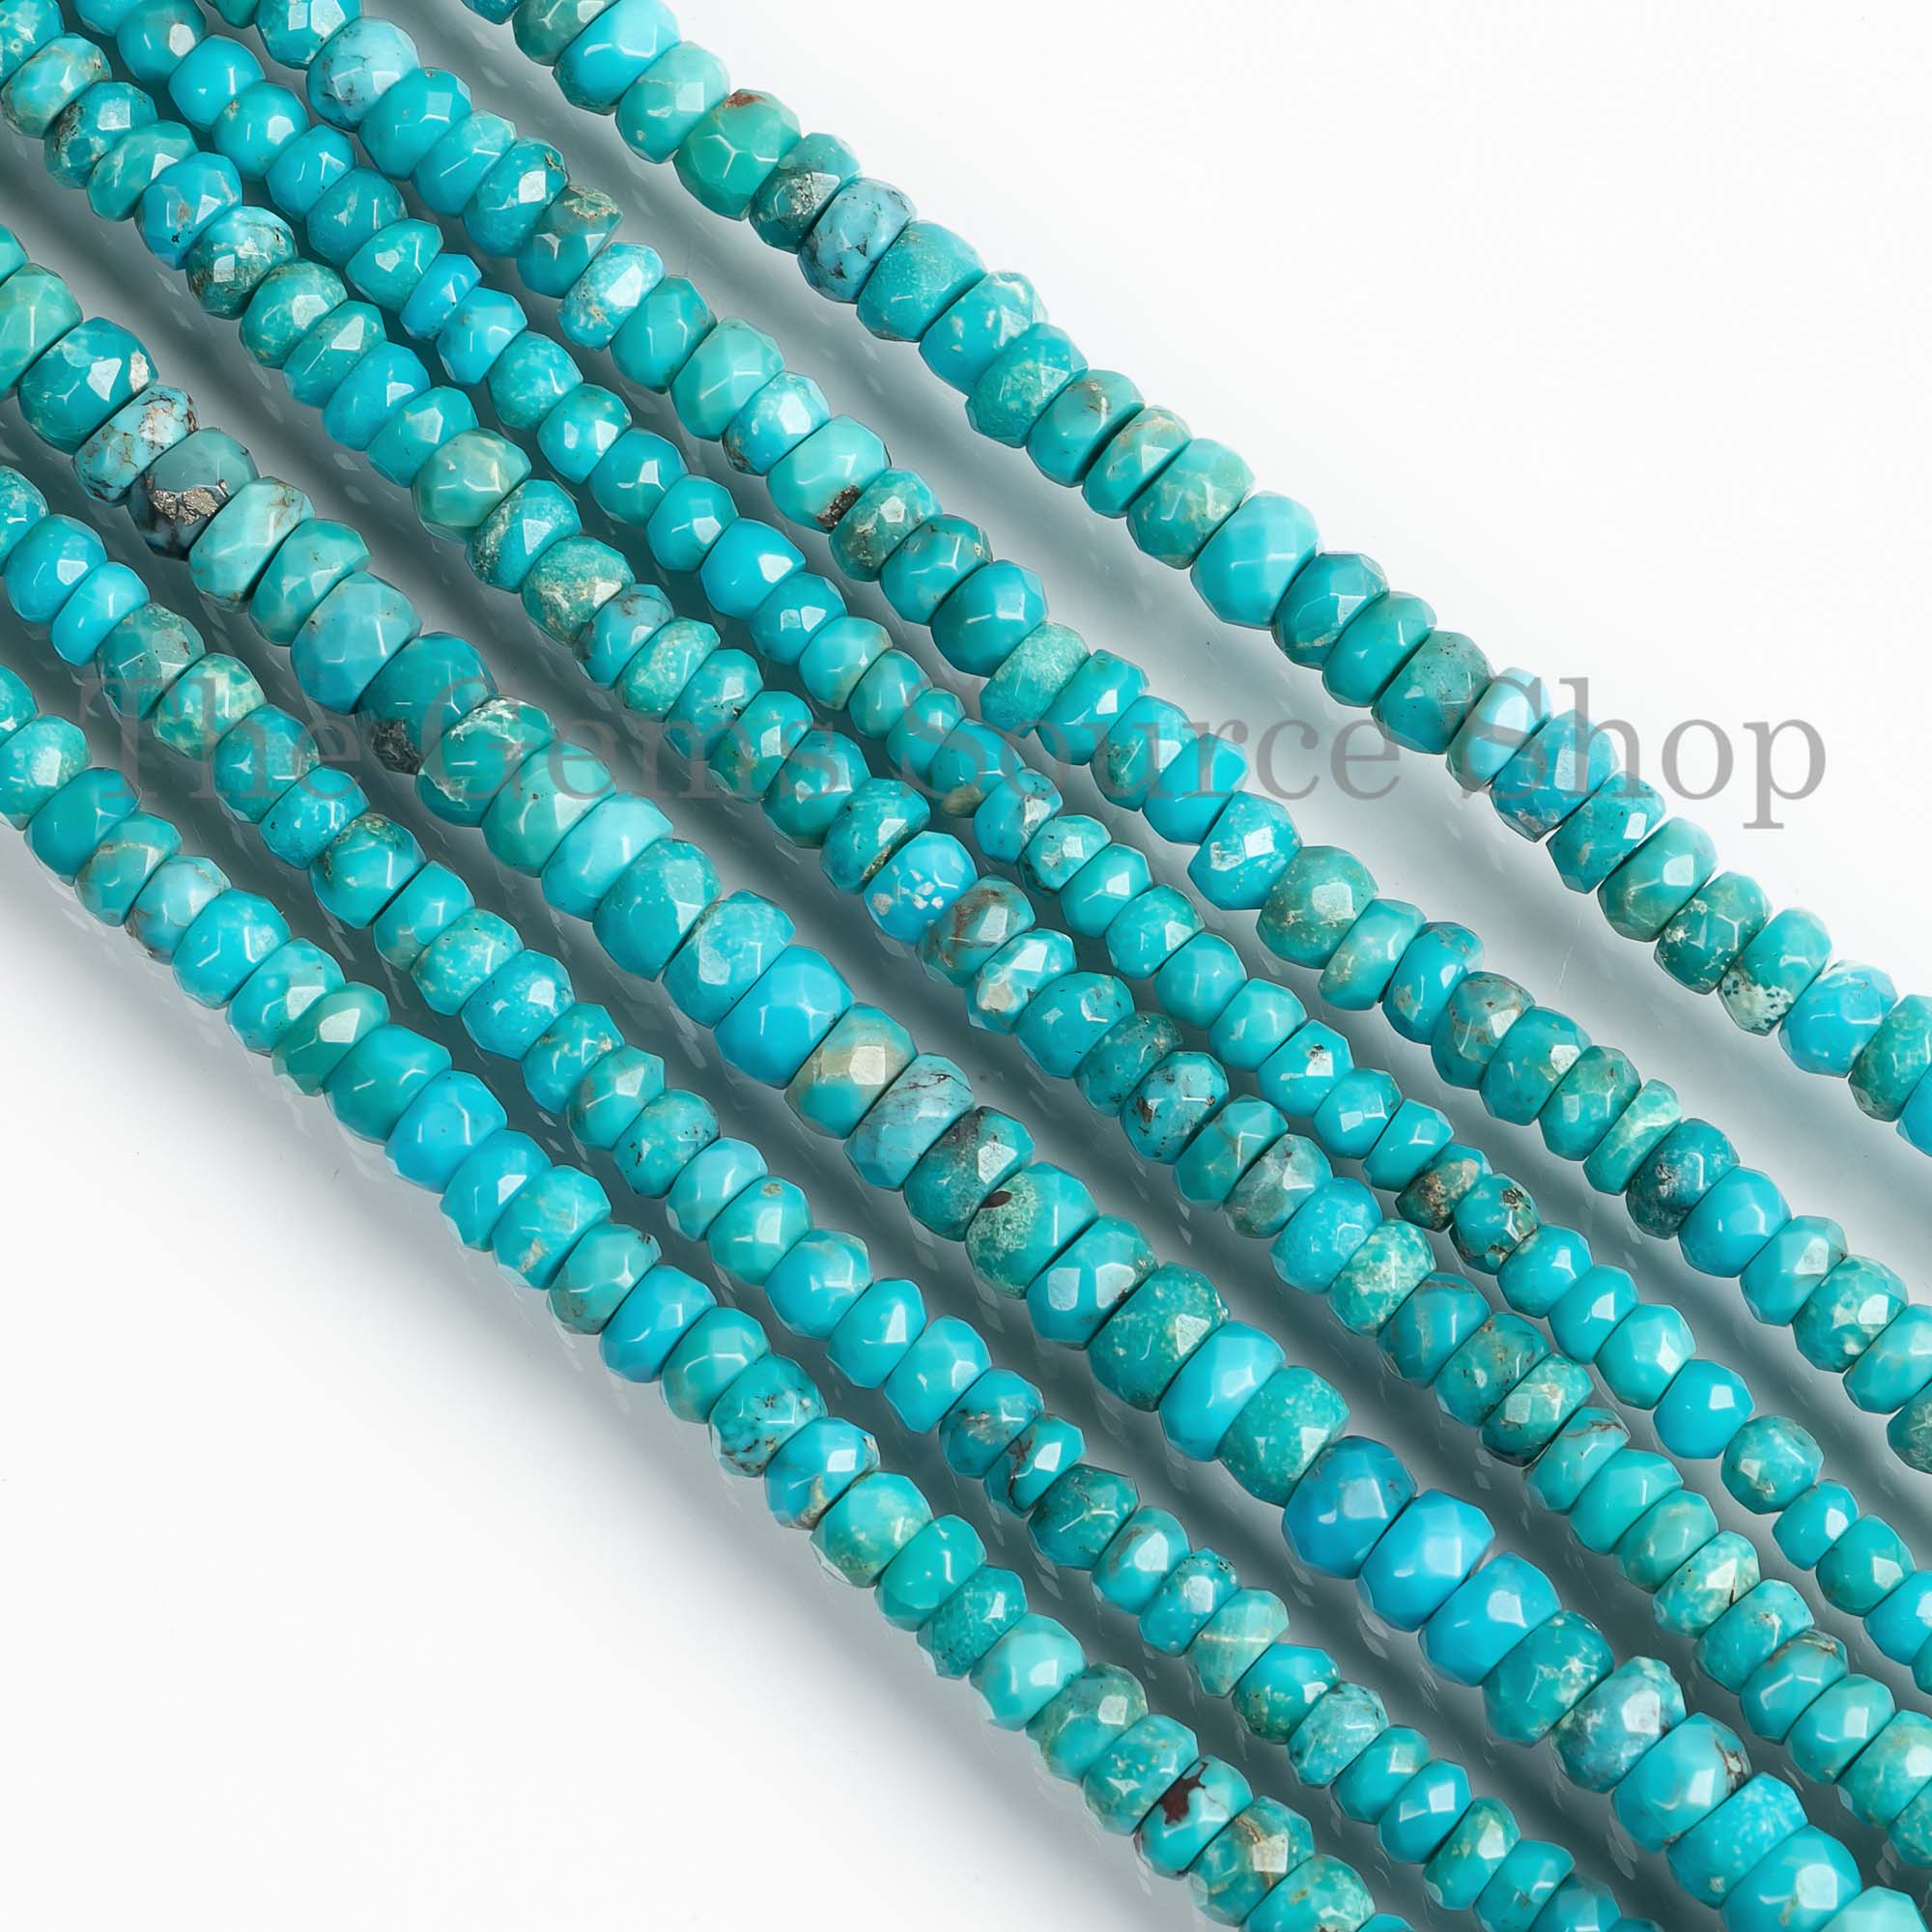 Natural Turquoise Faceted Rondelle Beads, 4-5mm Arizona Turquoise Faceted Rondelle, Turquoise Rondelle, Rondelle Beads, Wholesale Beads